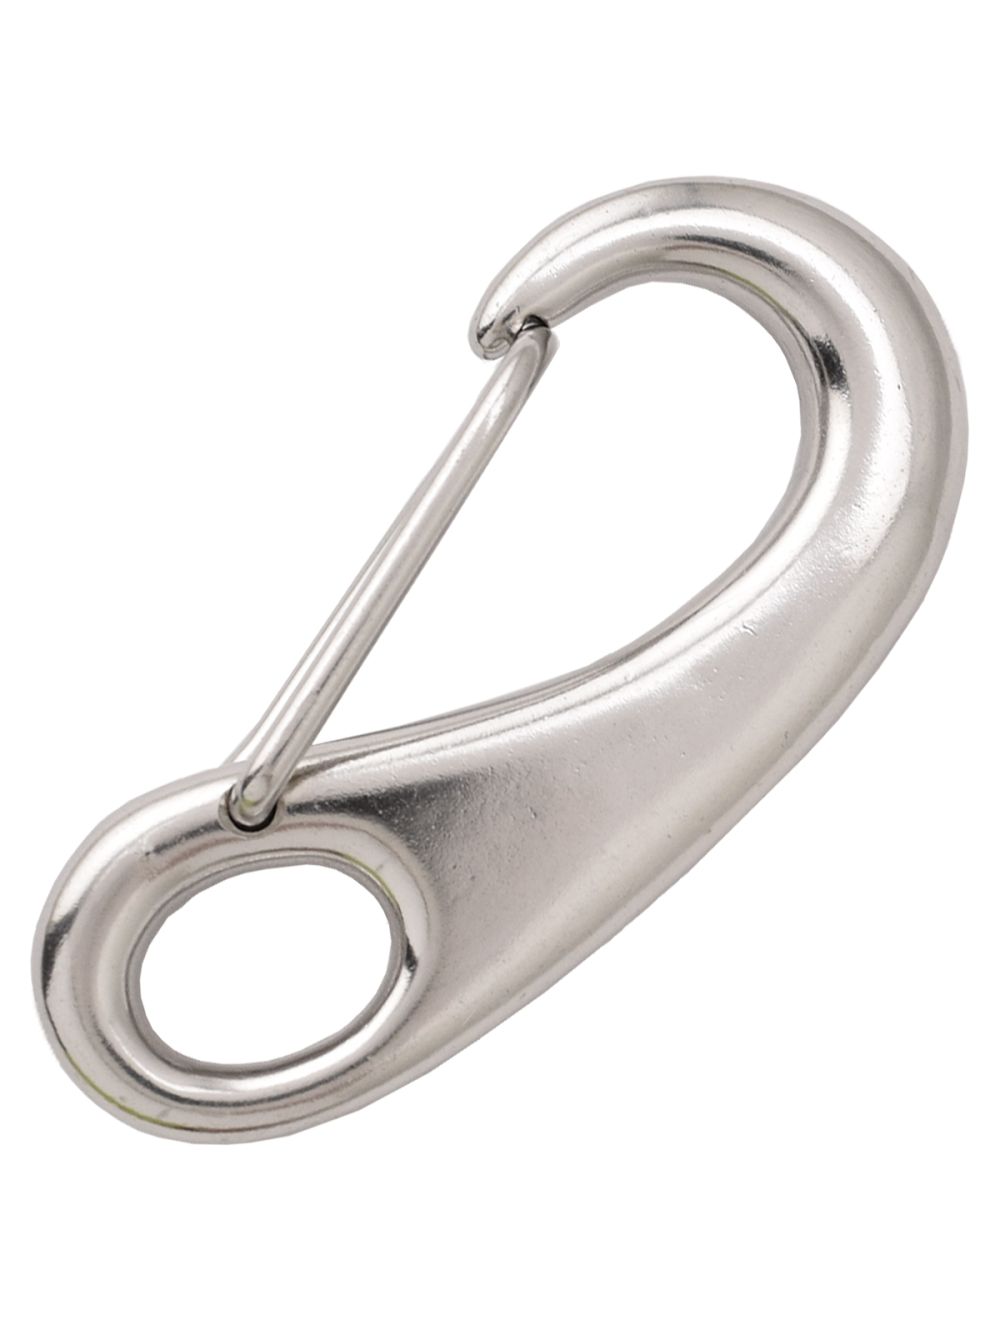 5/8 x 3-3/4 Stainless Steel Spring Snap Hook with Eye